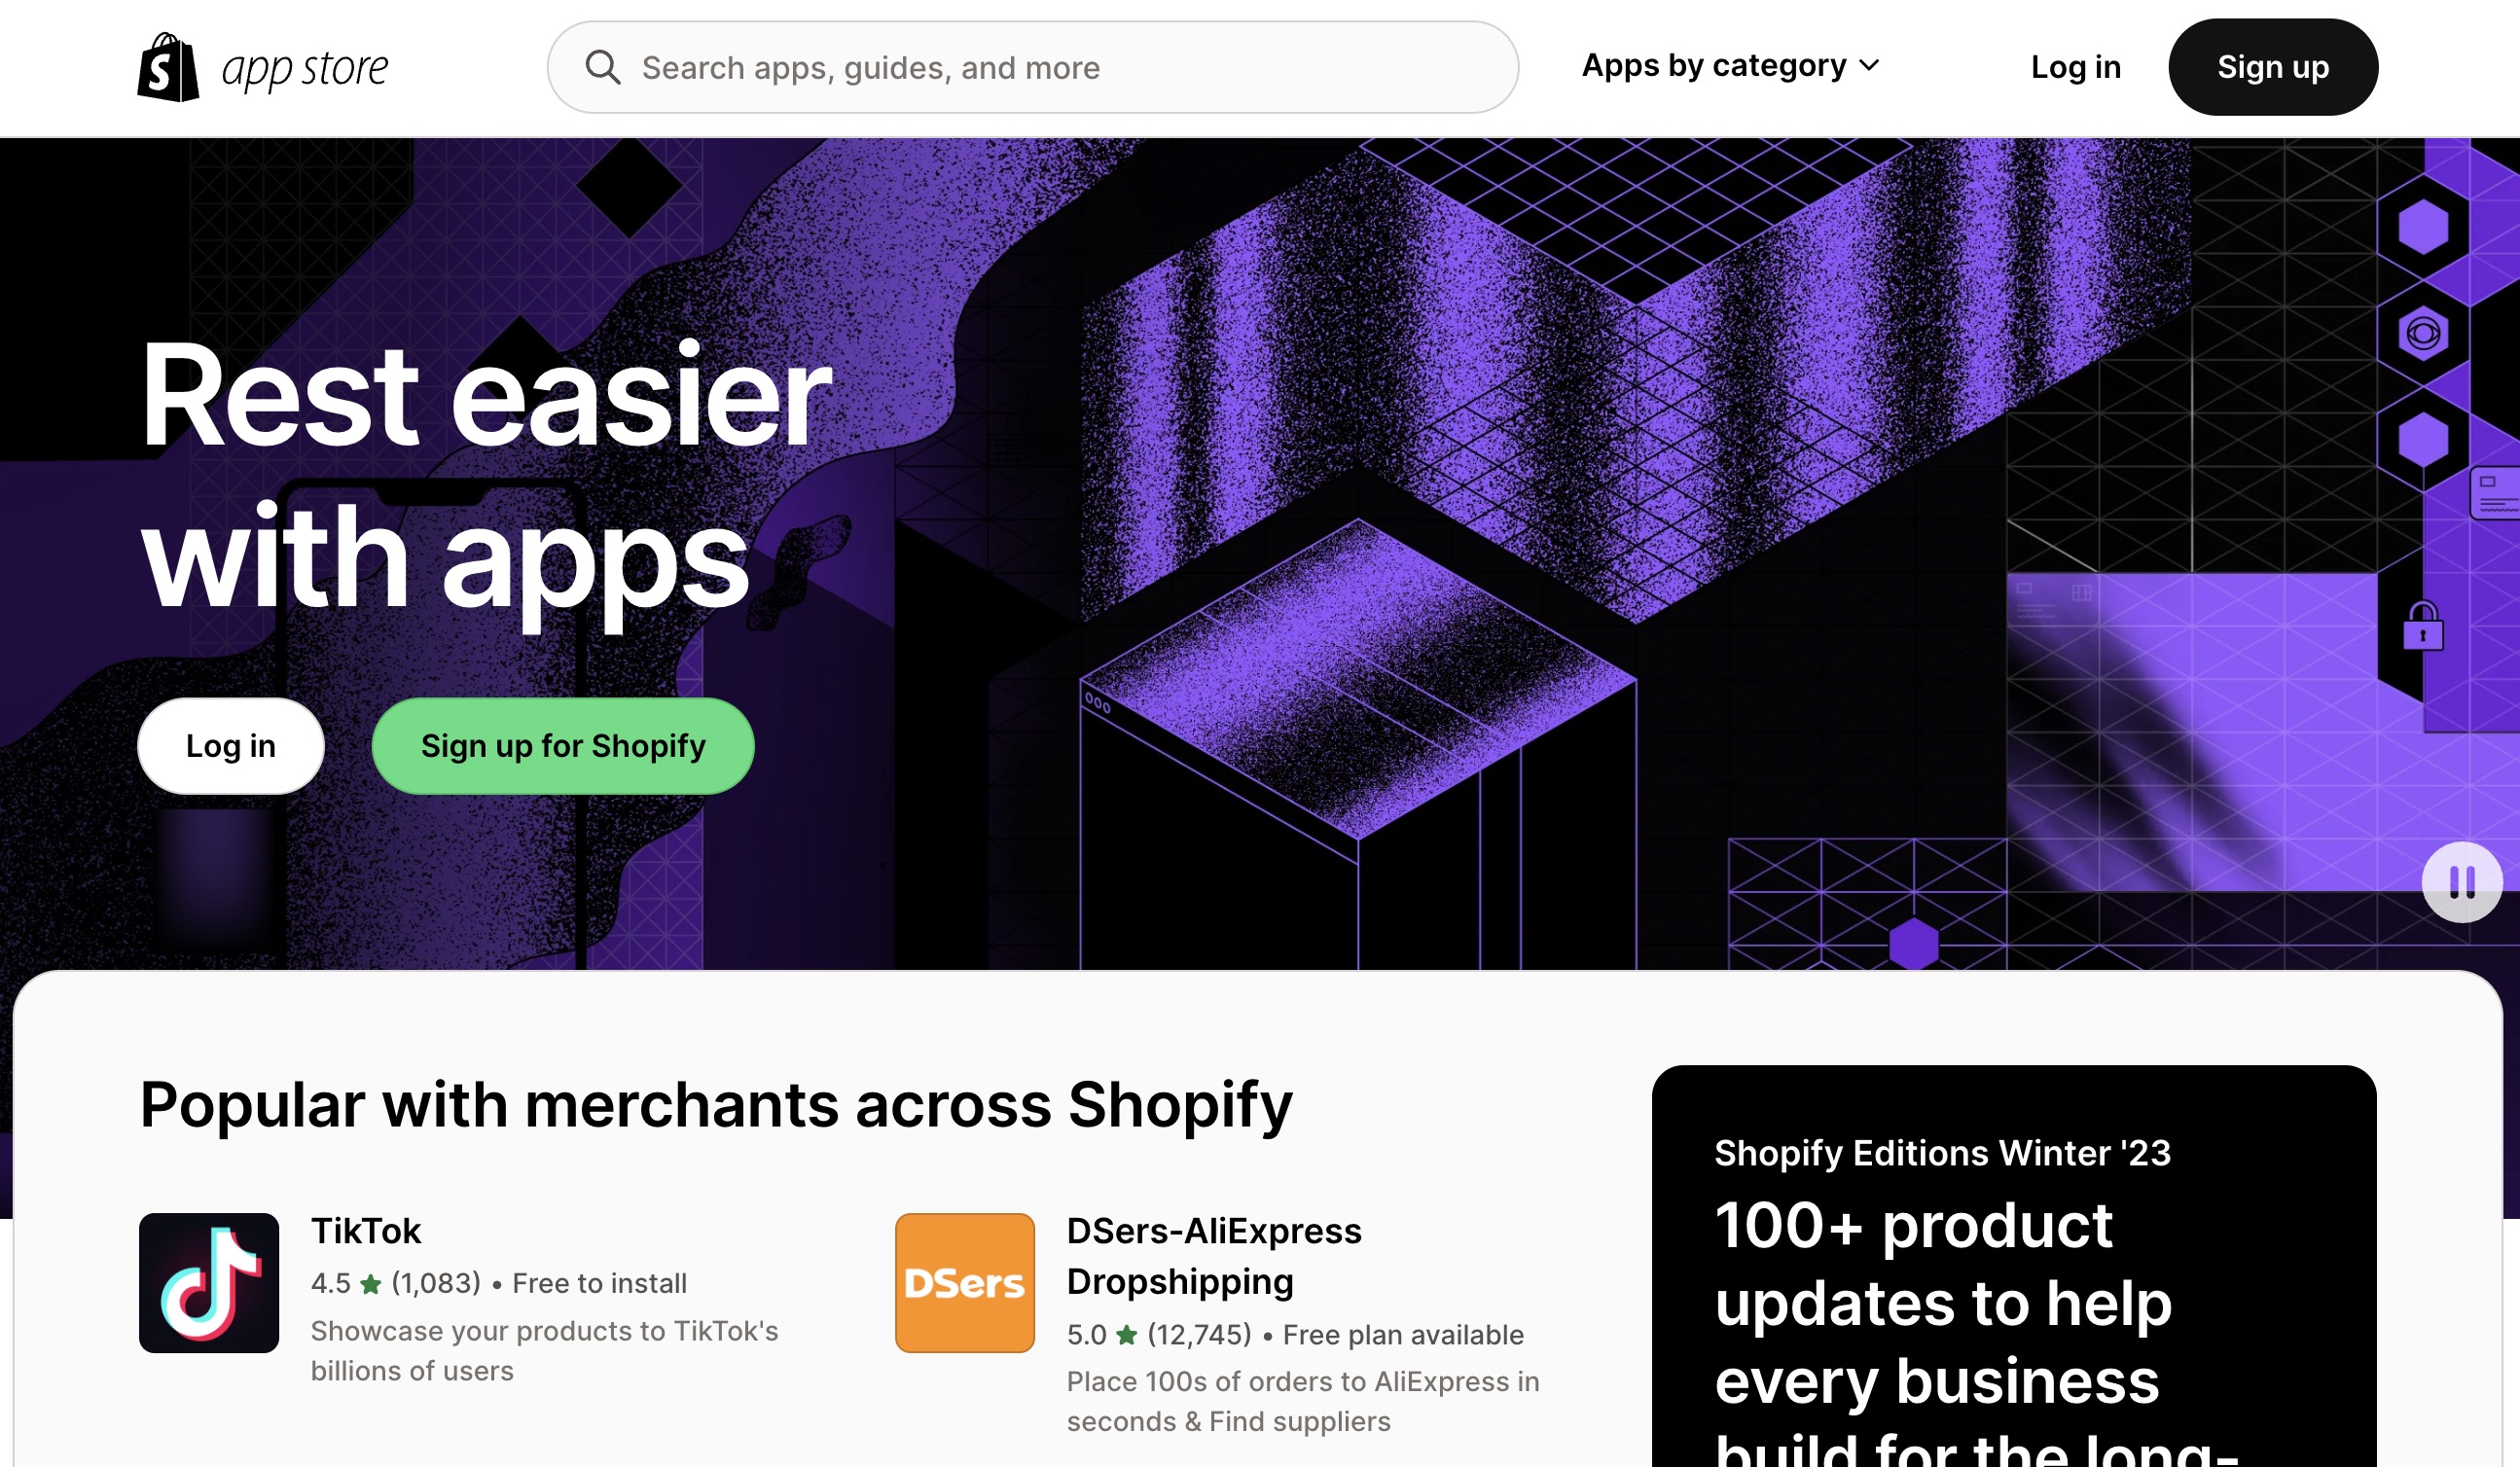 Shopify App Store listing featured apps.